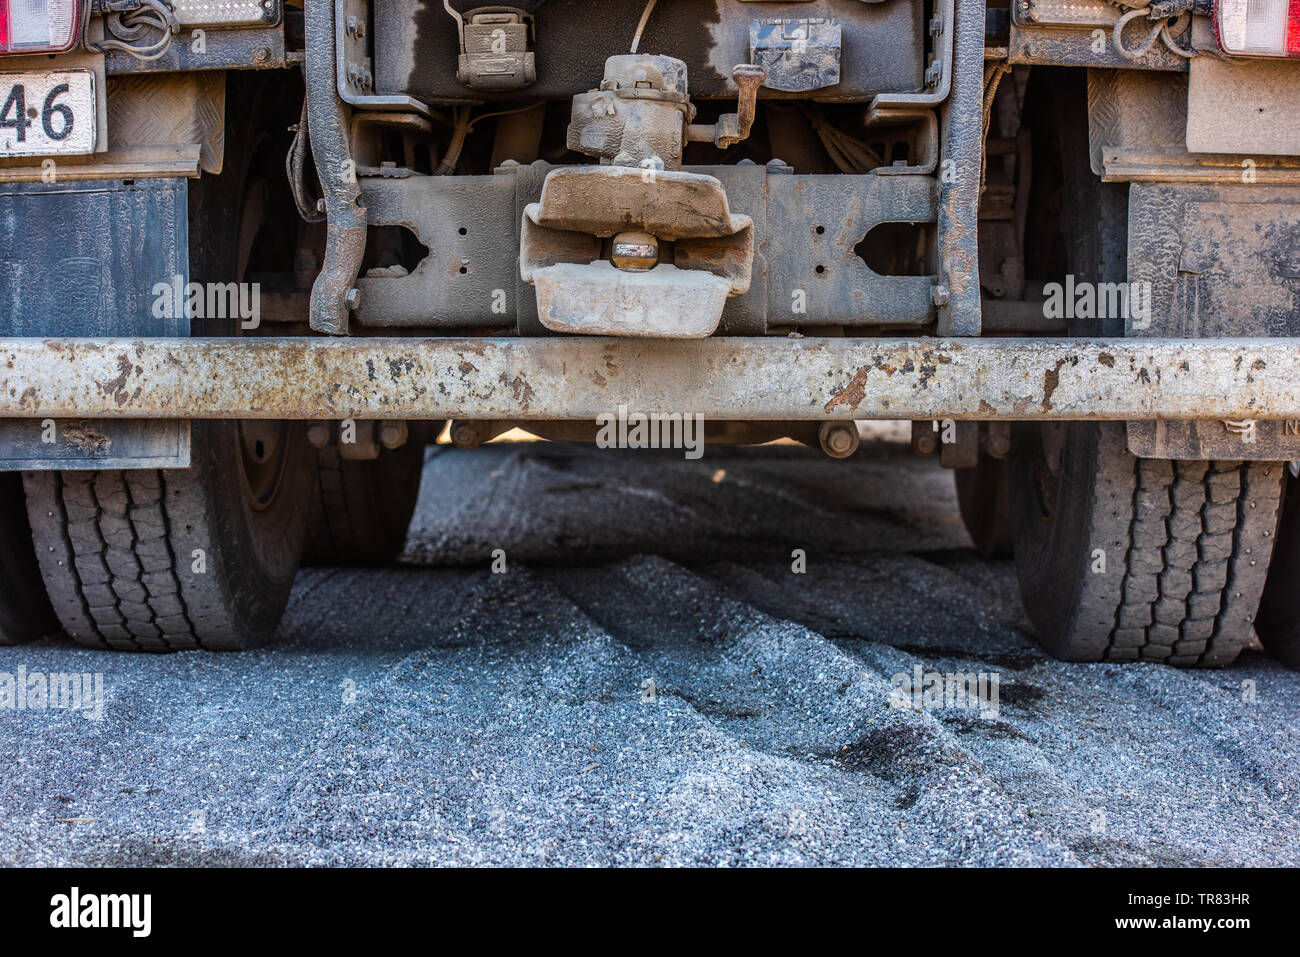 The back of a truck with a trailer coupling. Stock Photo